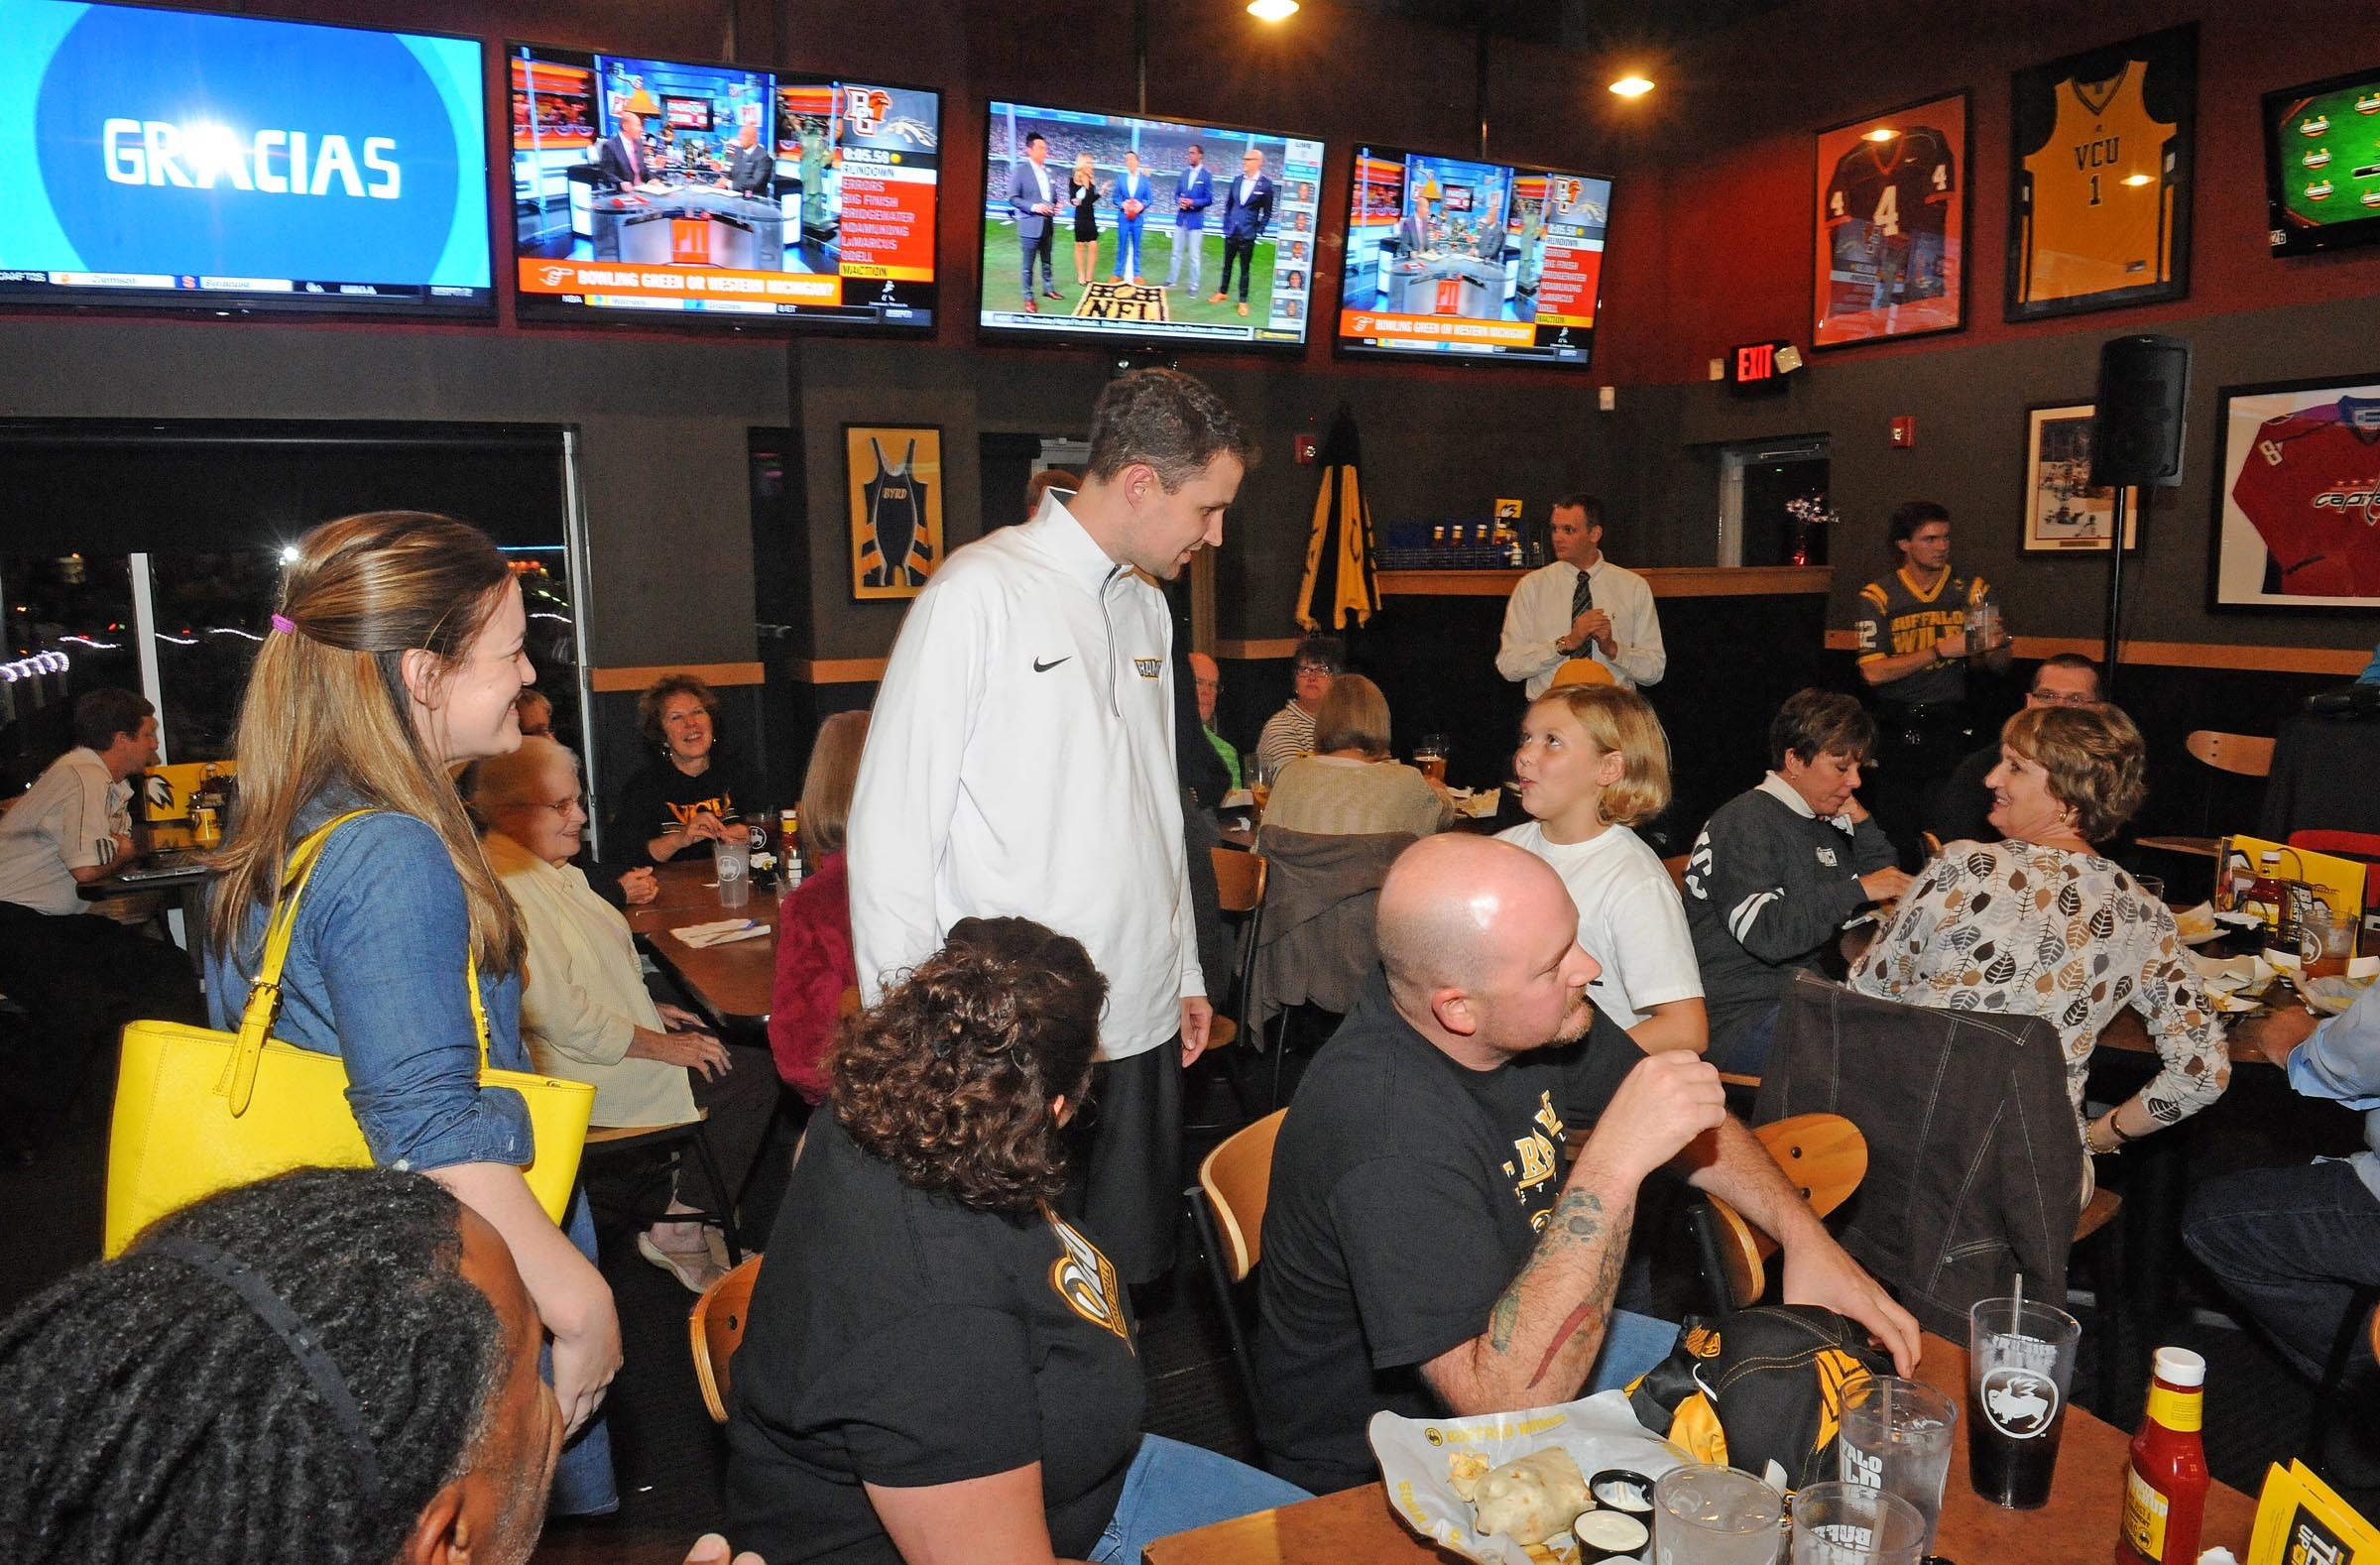 Wade meets with fans and well-wishers at the Buffalo Wild Wings last month in Short Pump before a taping of his coach’s show, which airs on ESPN-AM 950. - SCOTT ELMQUIST